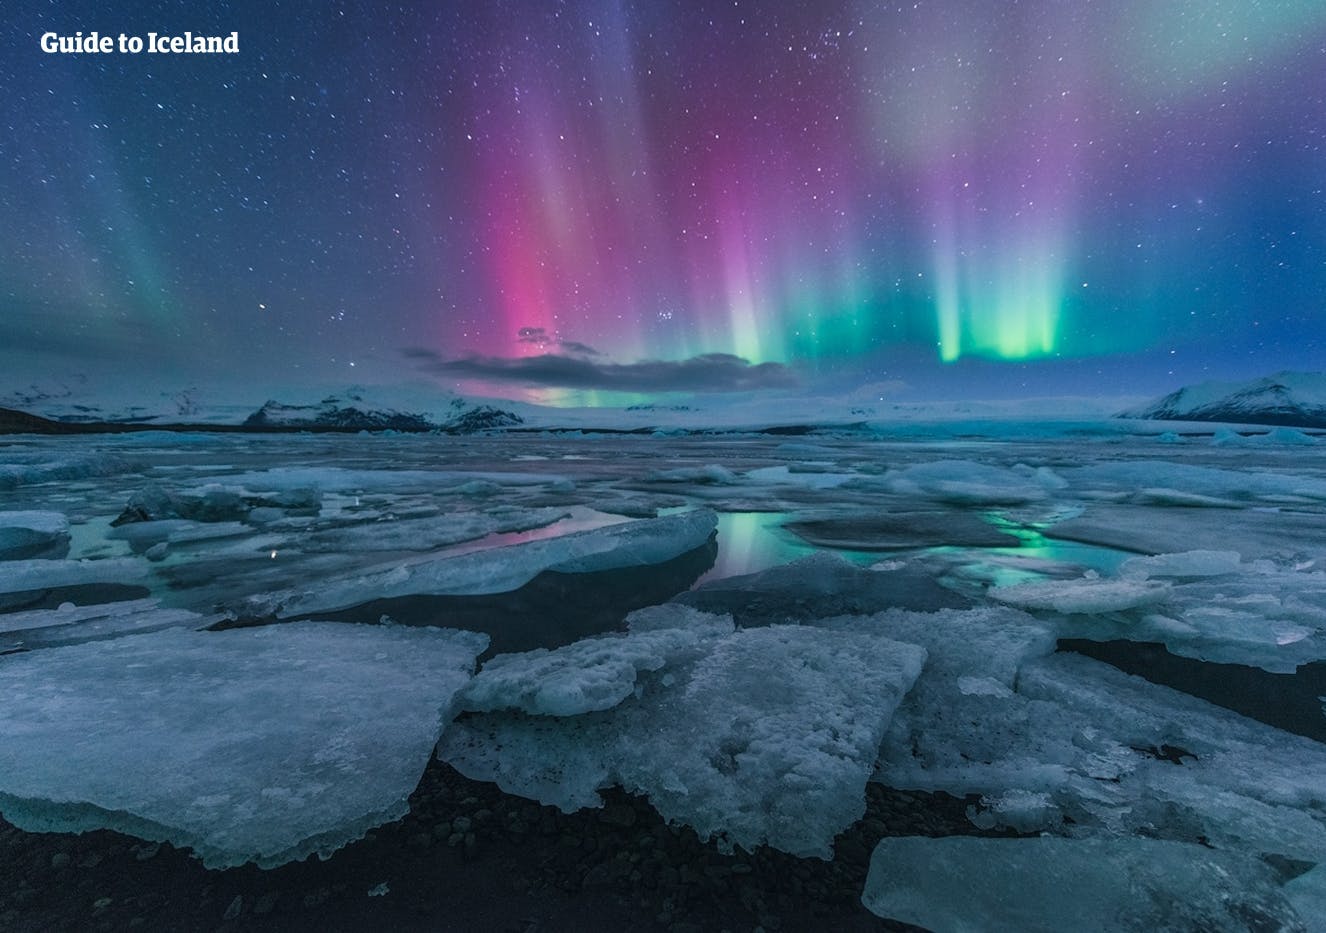 Blue and pink Northern Lights mirrored in the calm, blue surface of Jökulsárlón Glacier Lagoon.